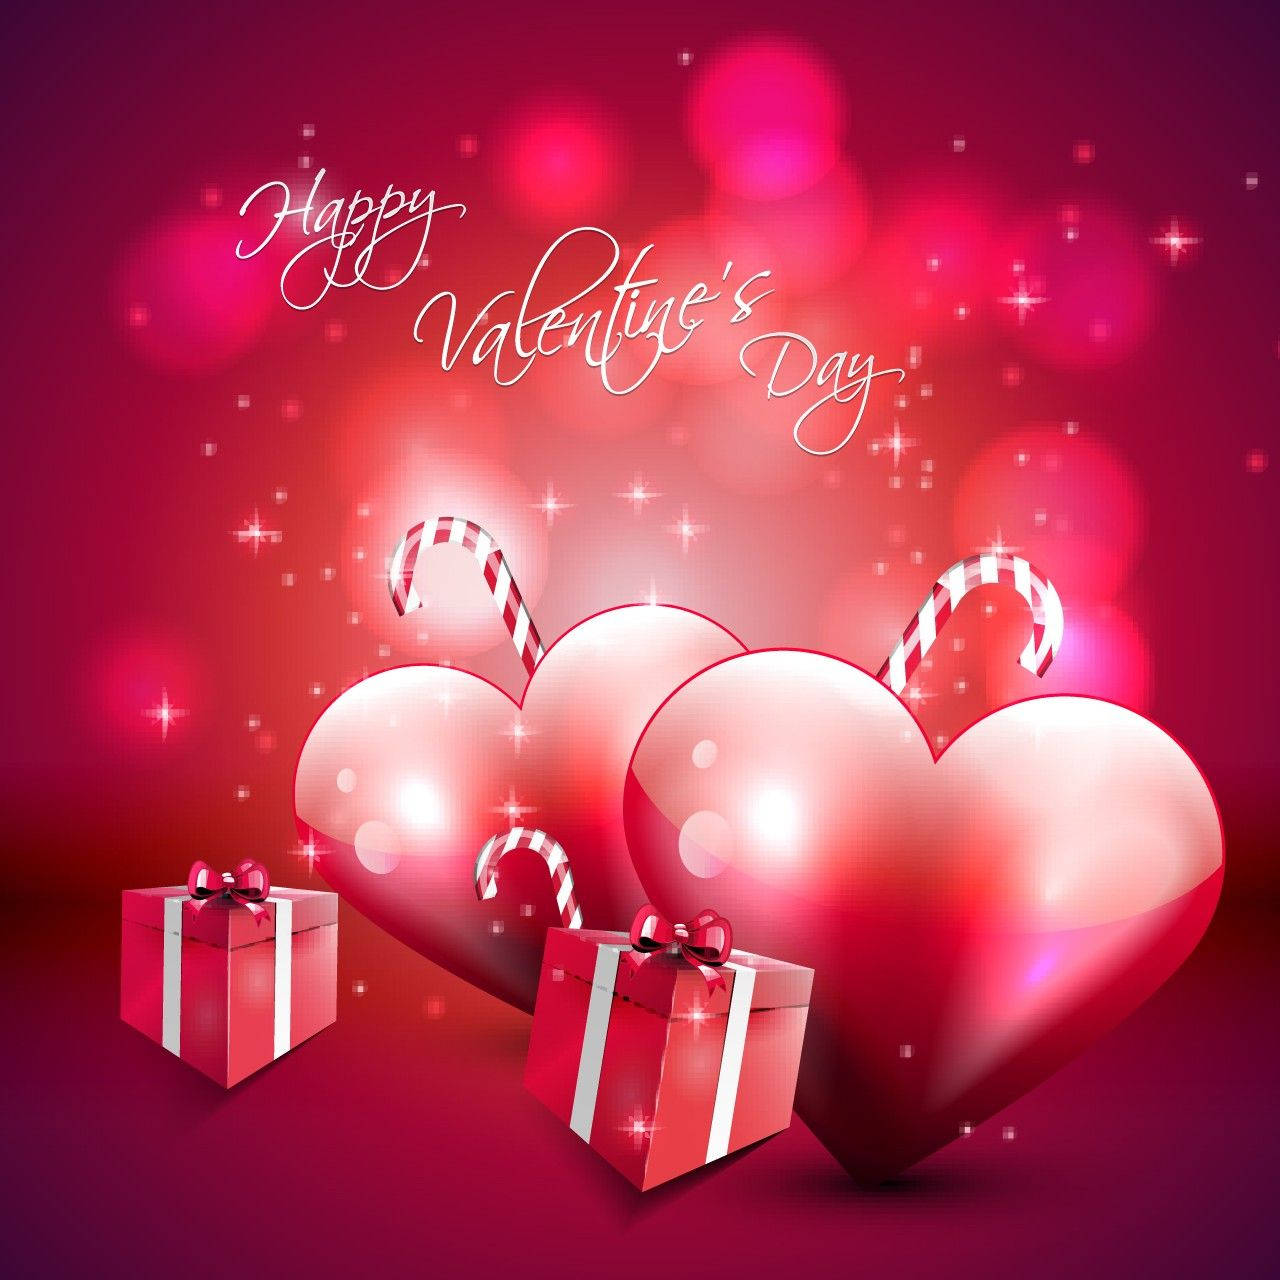 100+] Cute Happy Valentine Day Wallpapers